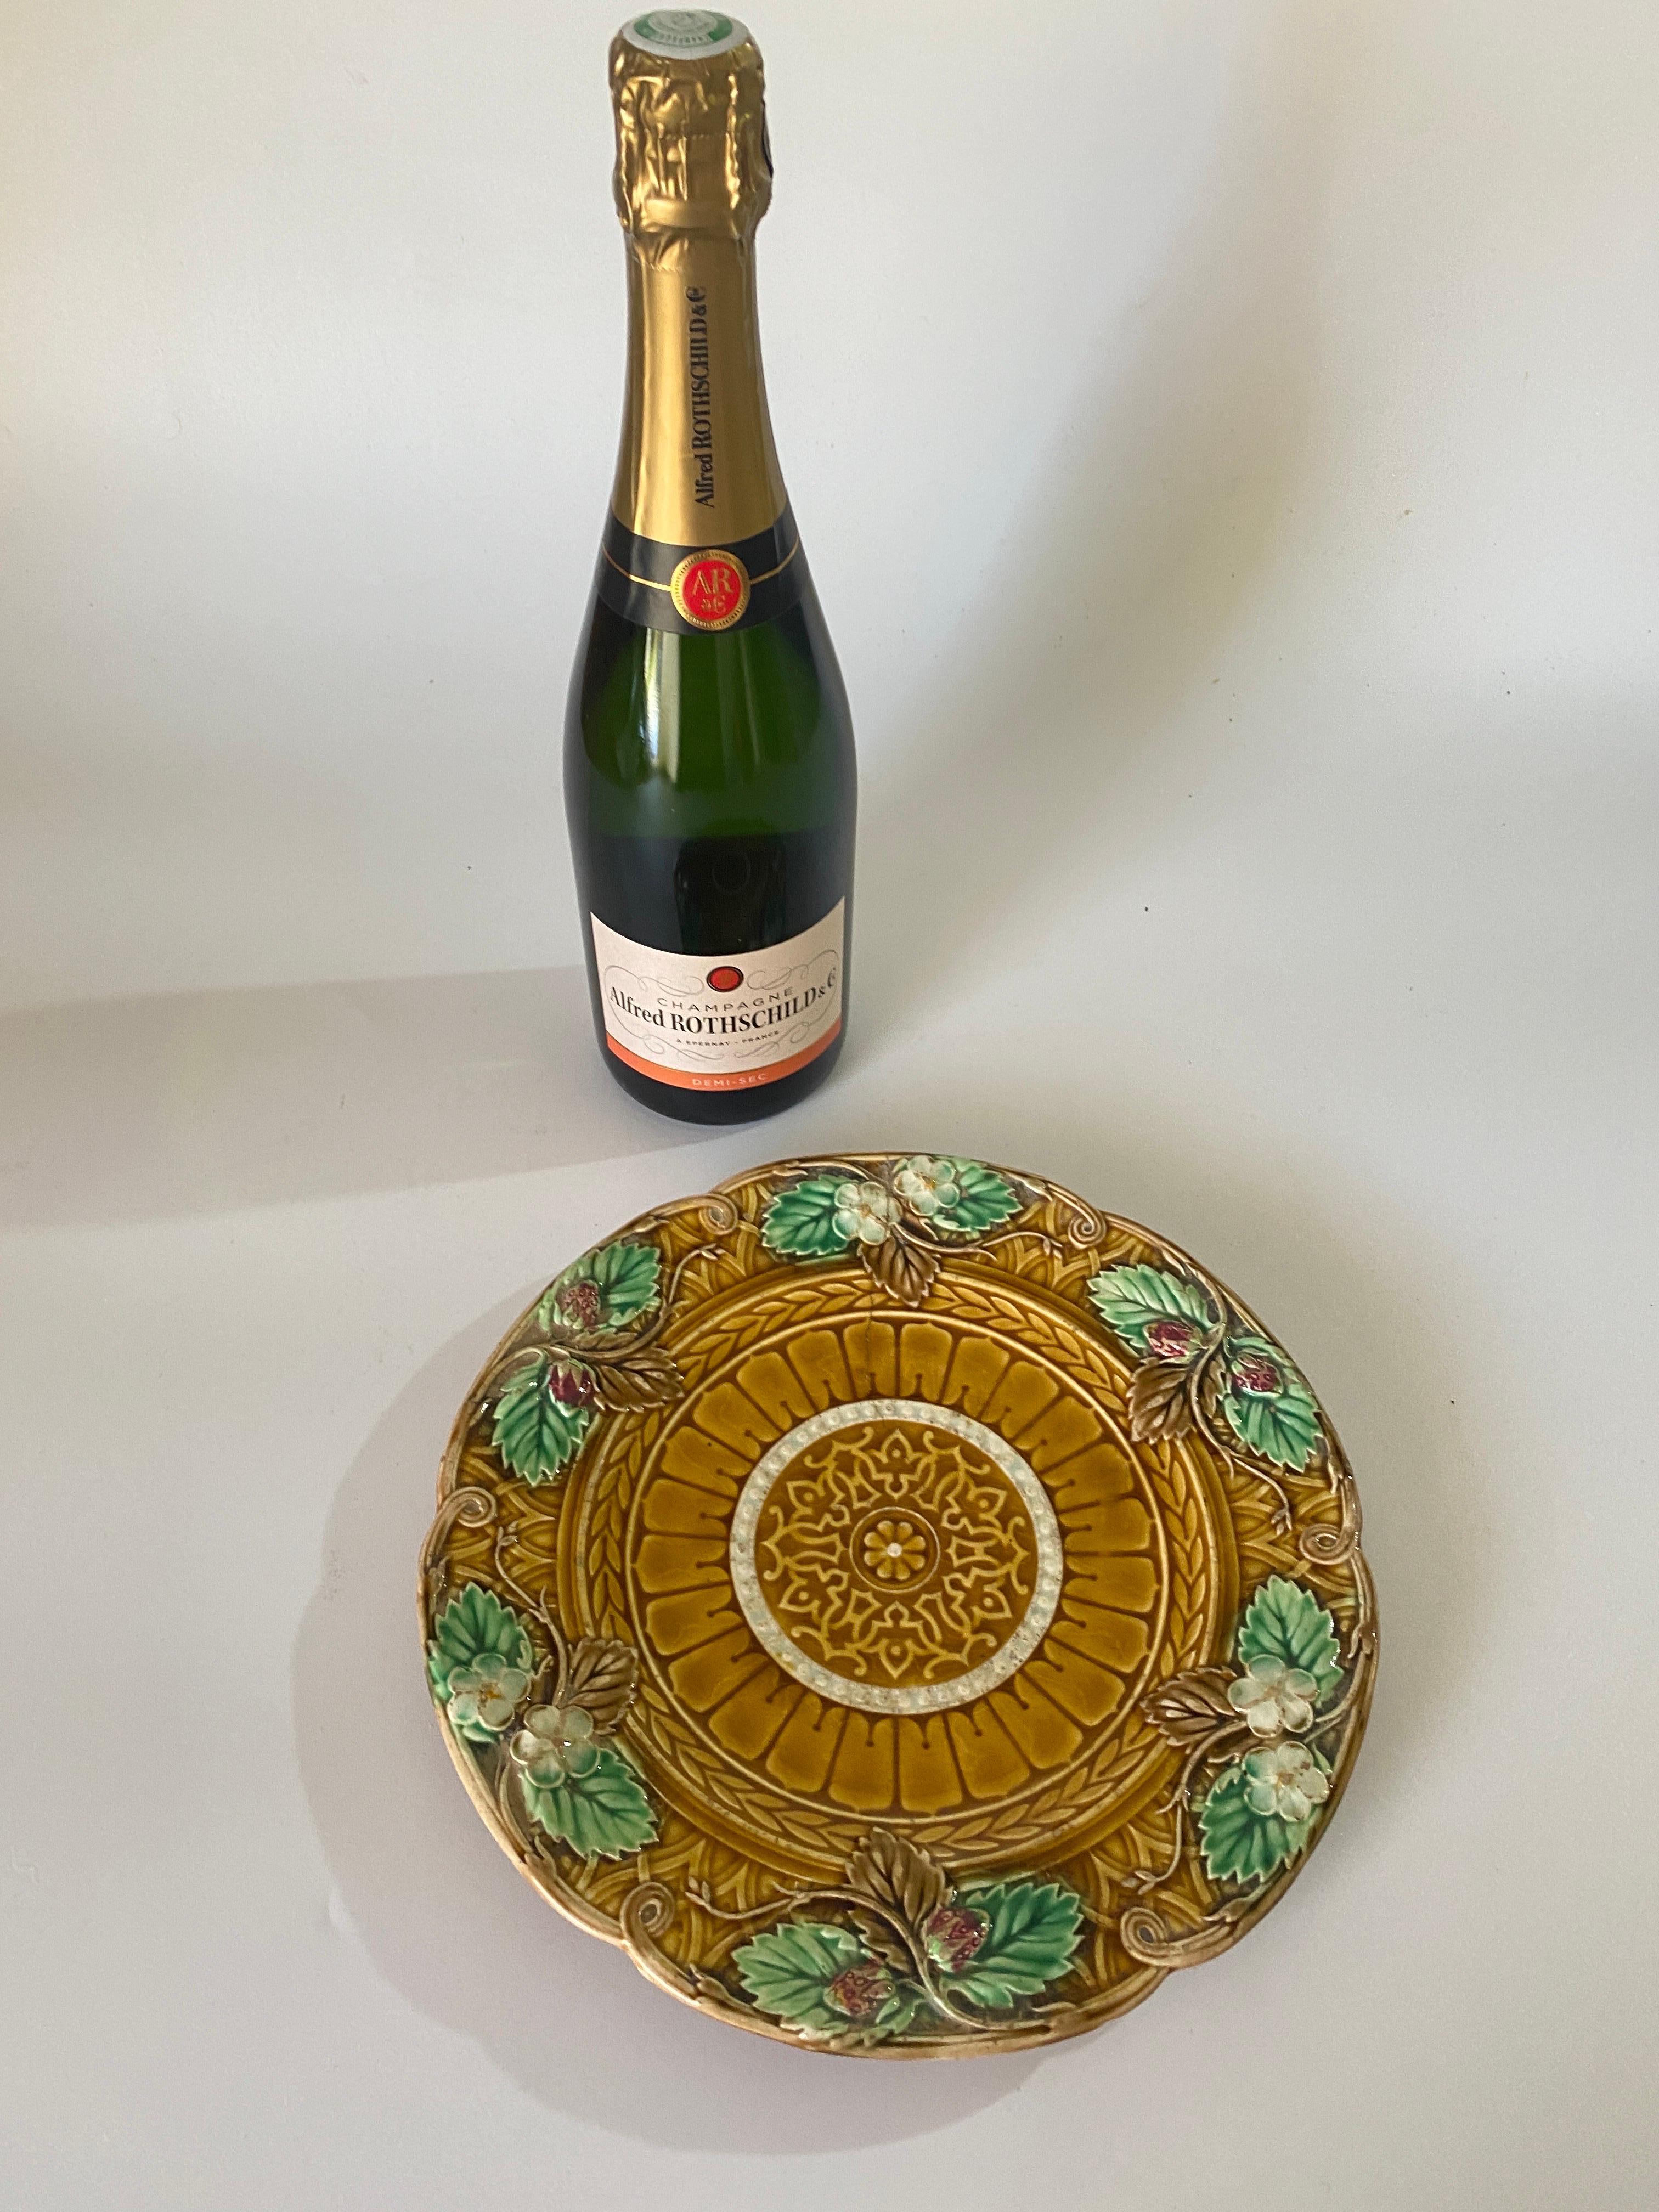 This Plate is a Majolica plate made in the Sarreguemines Manufacture. This glazed Faience, is in yellow and green color. It has been done in the 19th century.